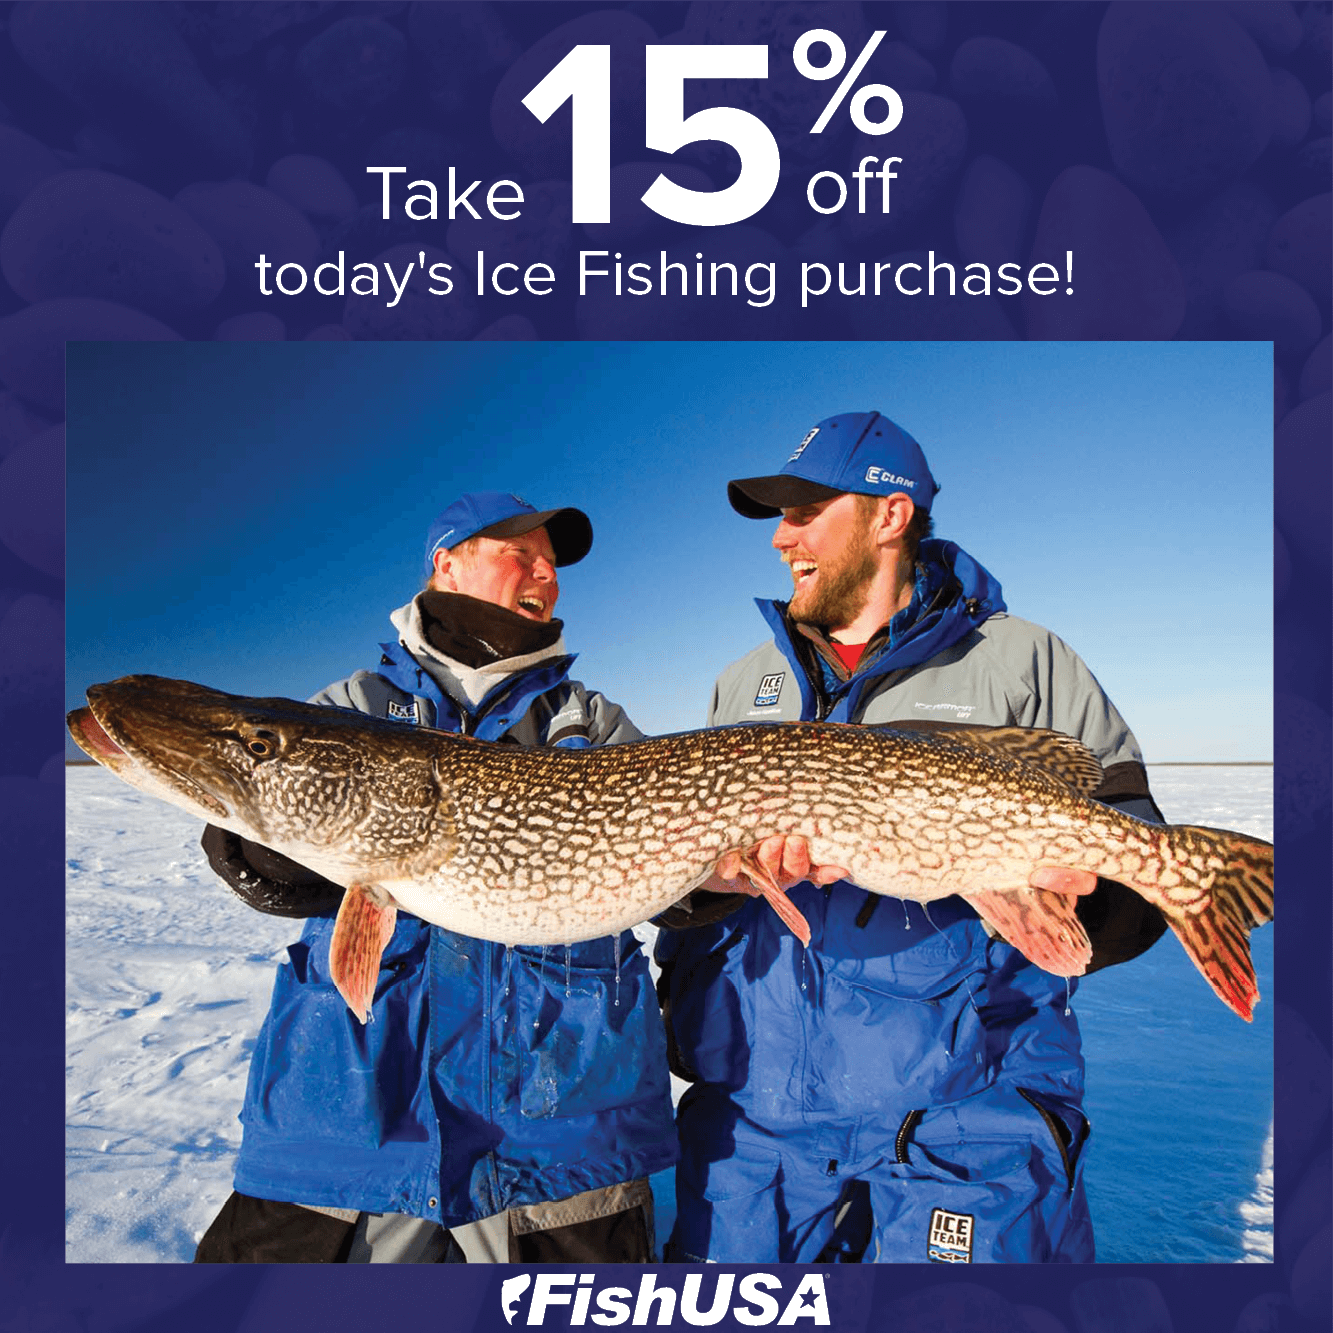 Take 15% off in the Ice Fishing Store